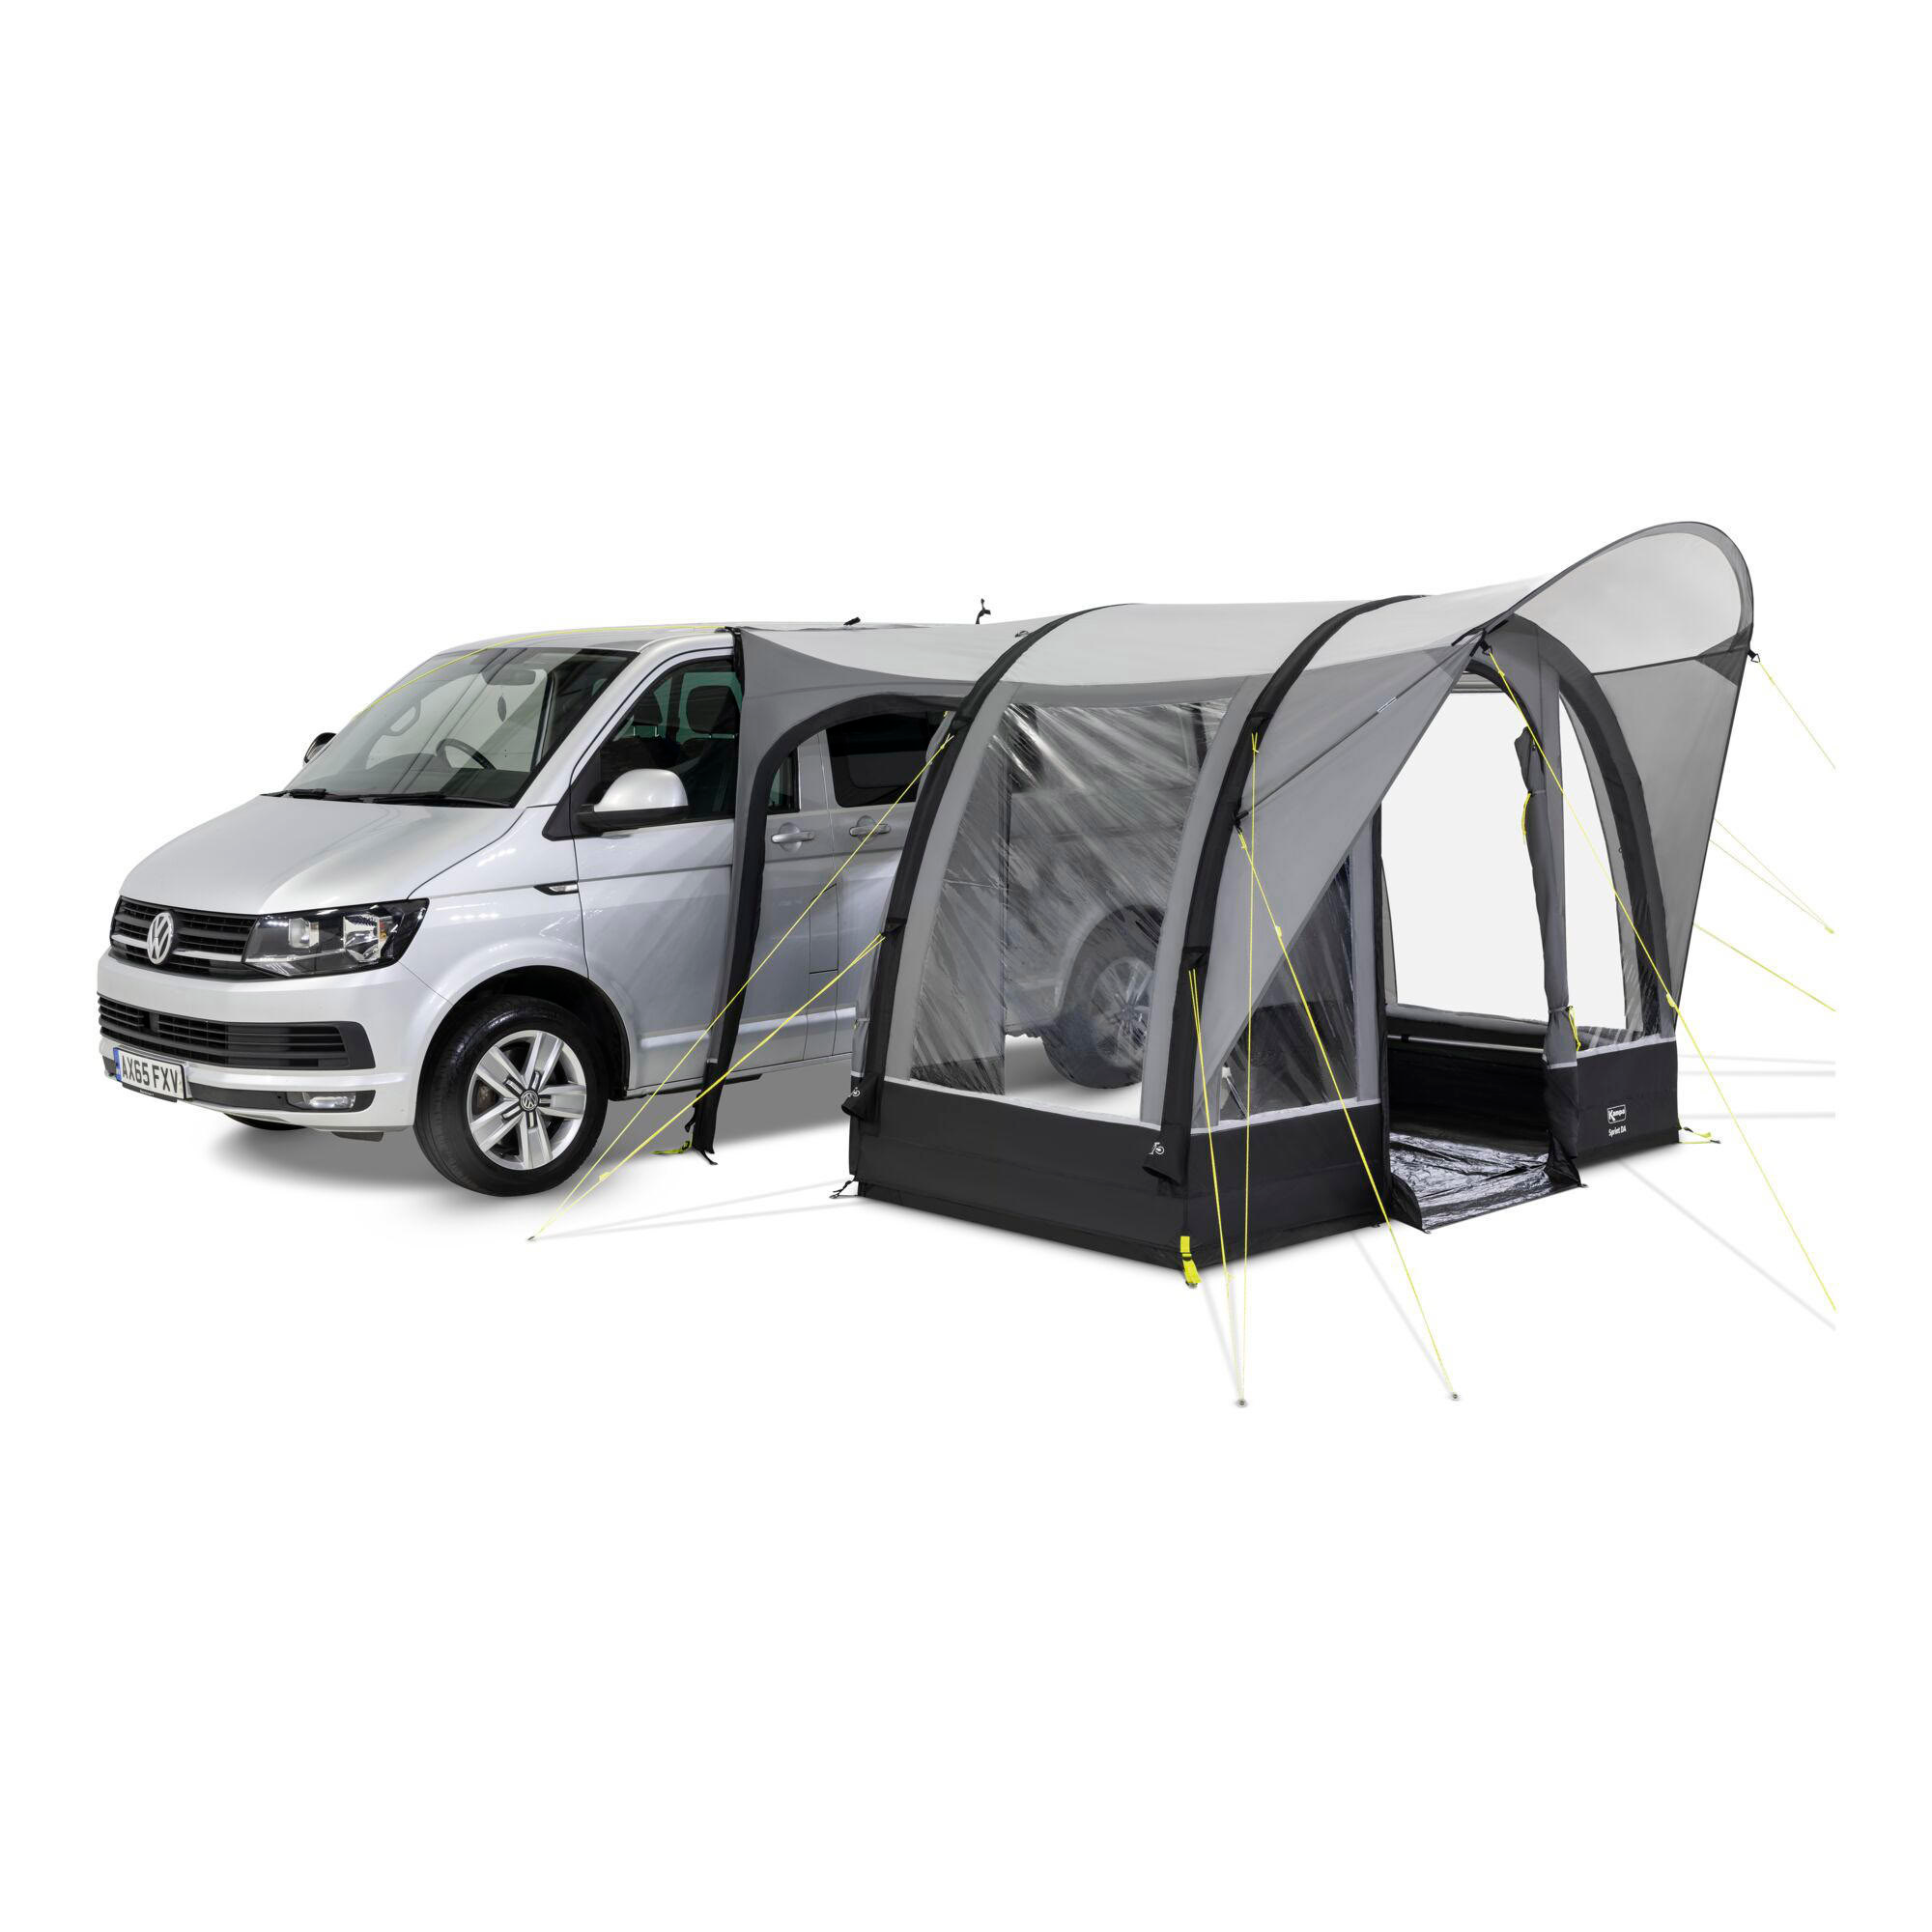 Camping with extend. Палатка kampa Dometic 6. Надувная палатка Dometic. Надувная палатка kampa. Надувная автомобильная палатка kampa Cross Air.